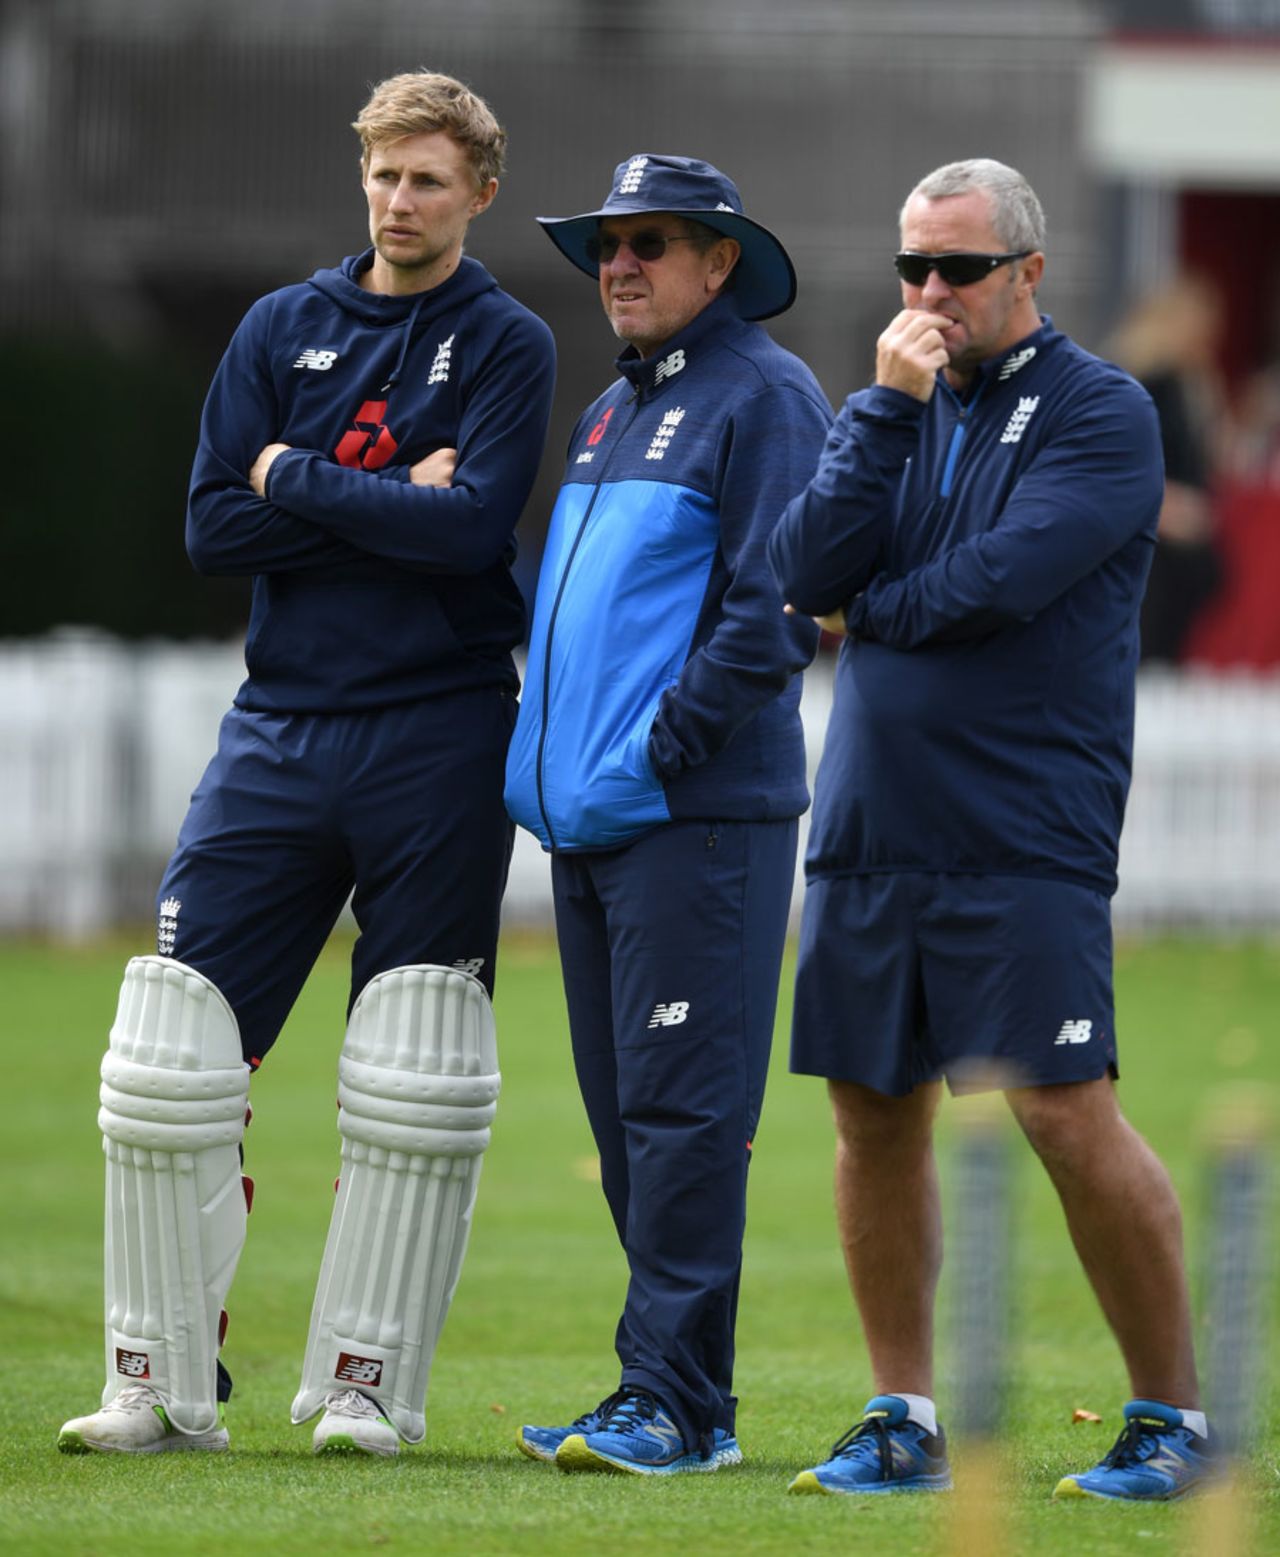 Joe Root, Trevor Bayliss and Paul Farbrace watch on during England nets, Lord's, September 6, 2017